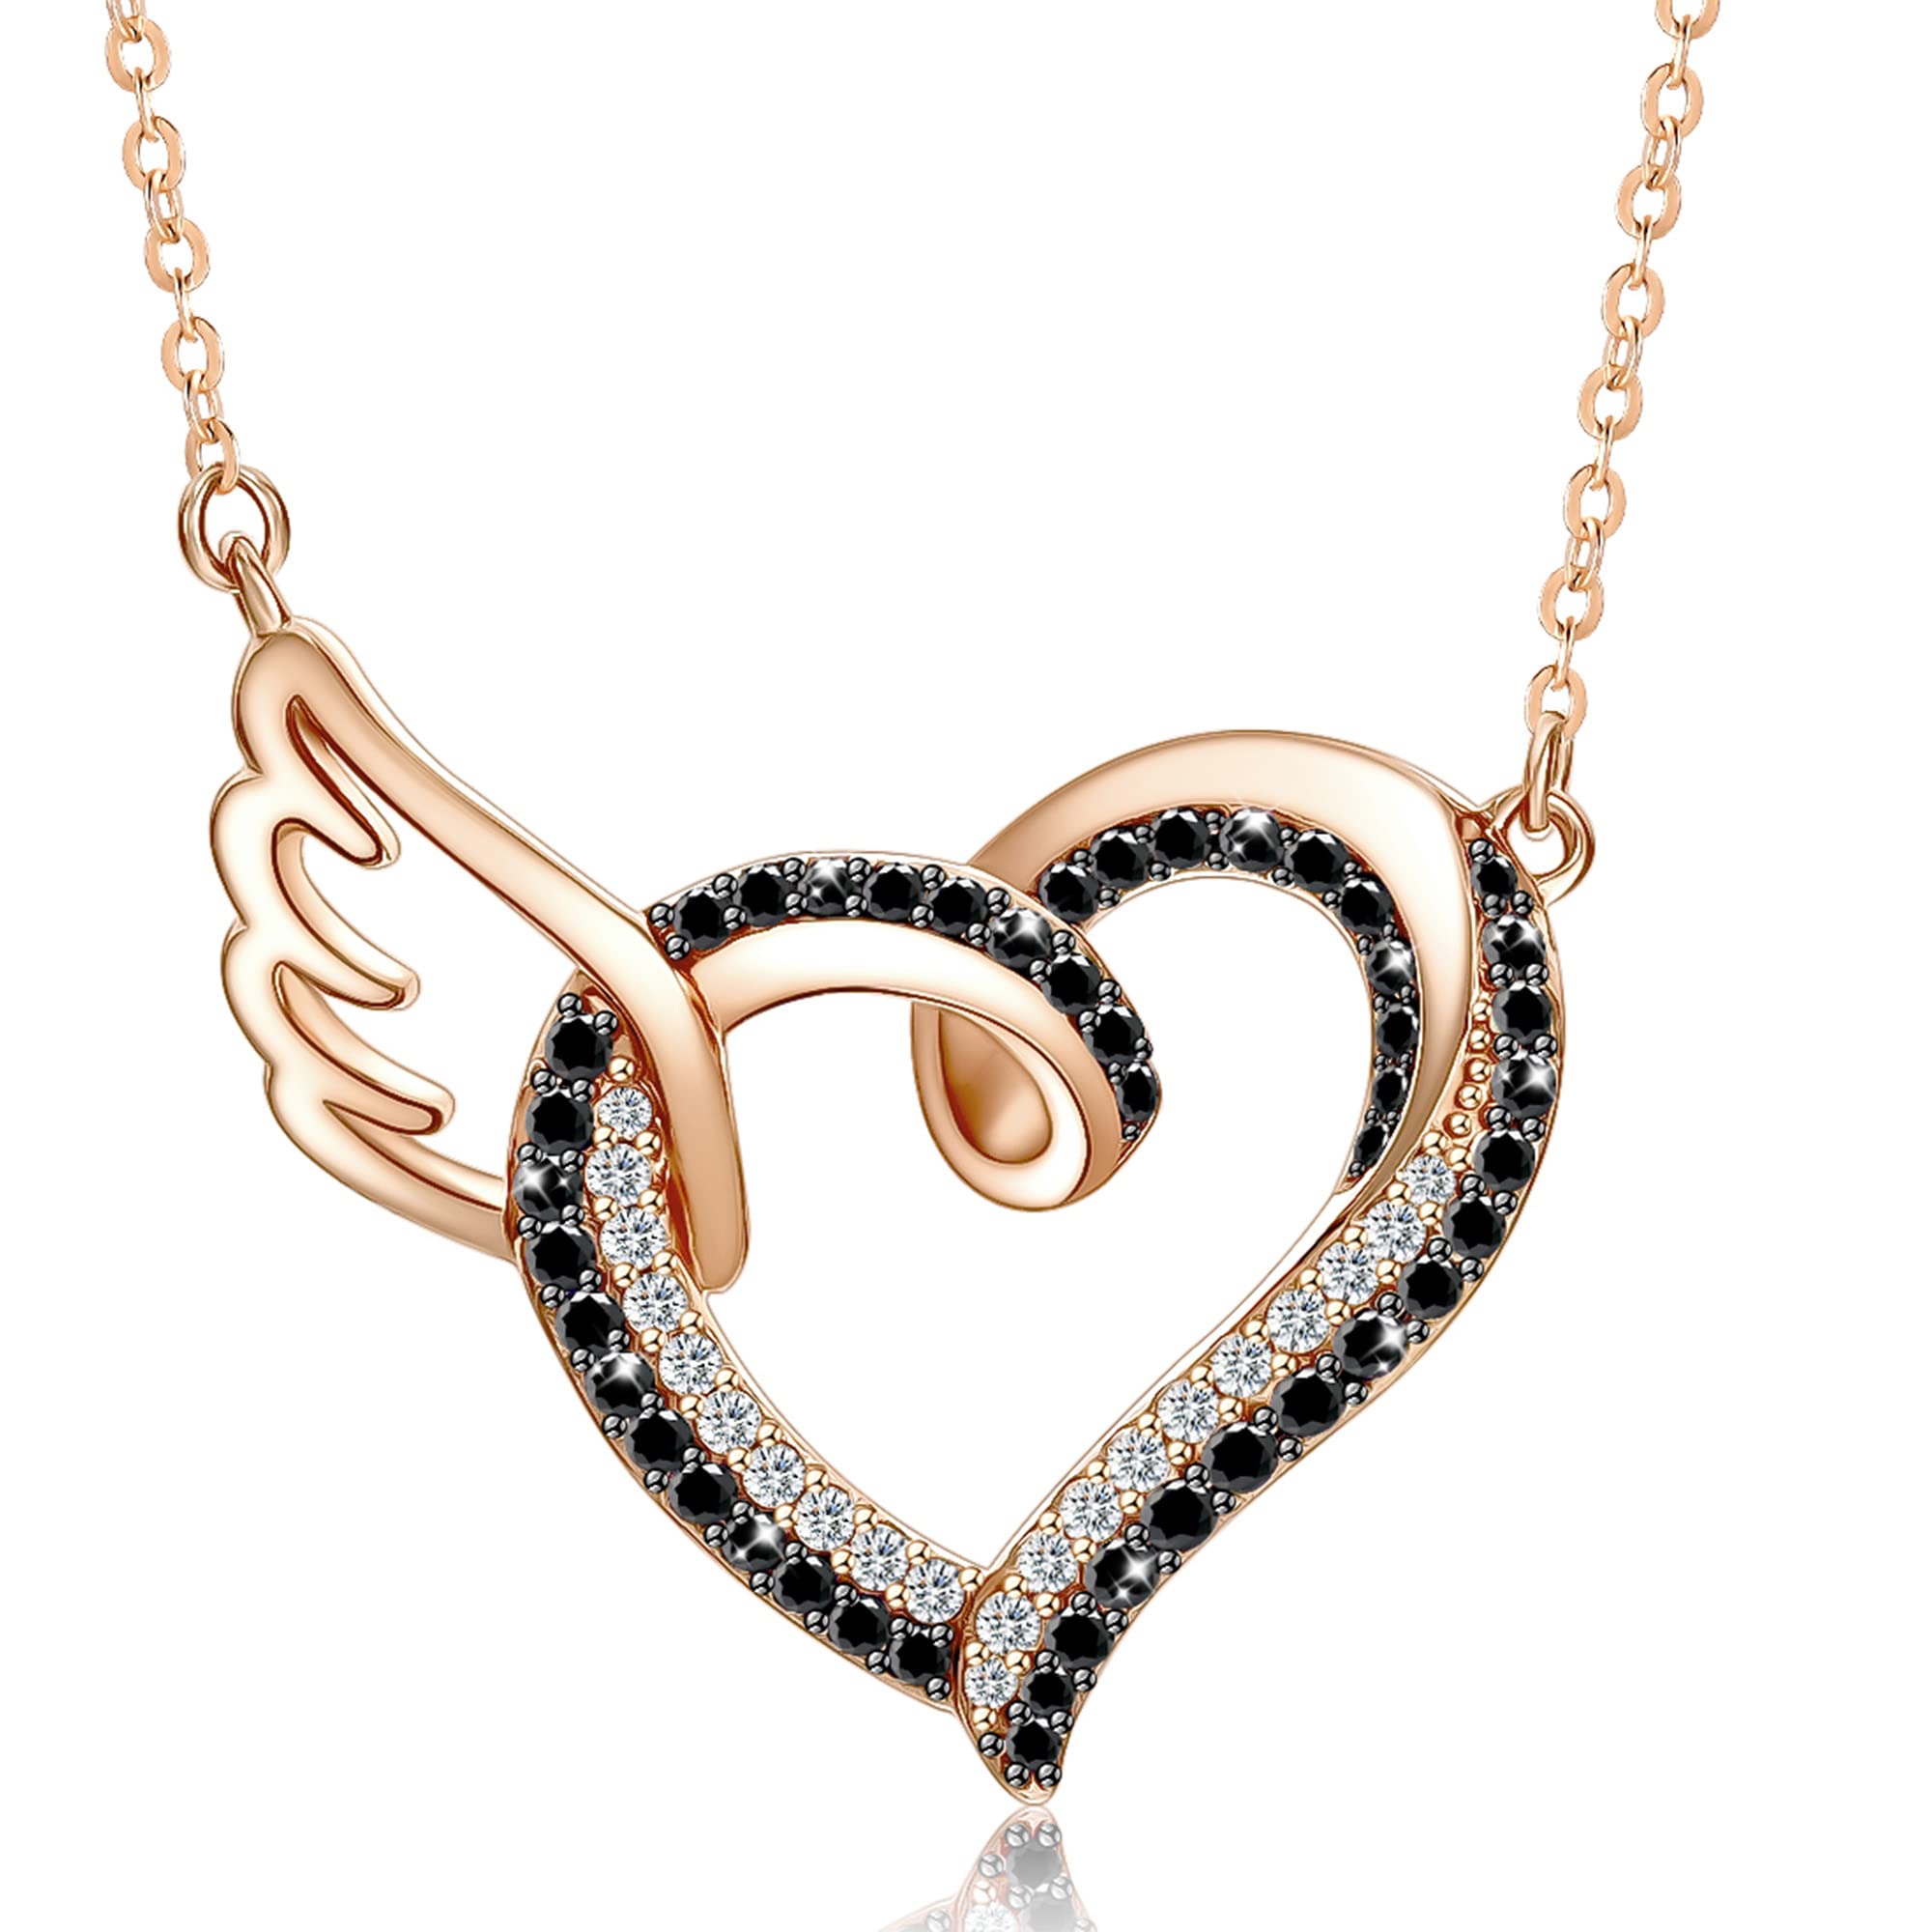 FOR MEMORIAL - I'LL HOLD YOU IN MY HEART UNTIL I CAN HOLD YOU IN HEAVEN BLACK DIAMOND NECKLACE-belovejewel.com